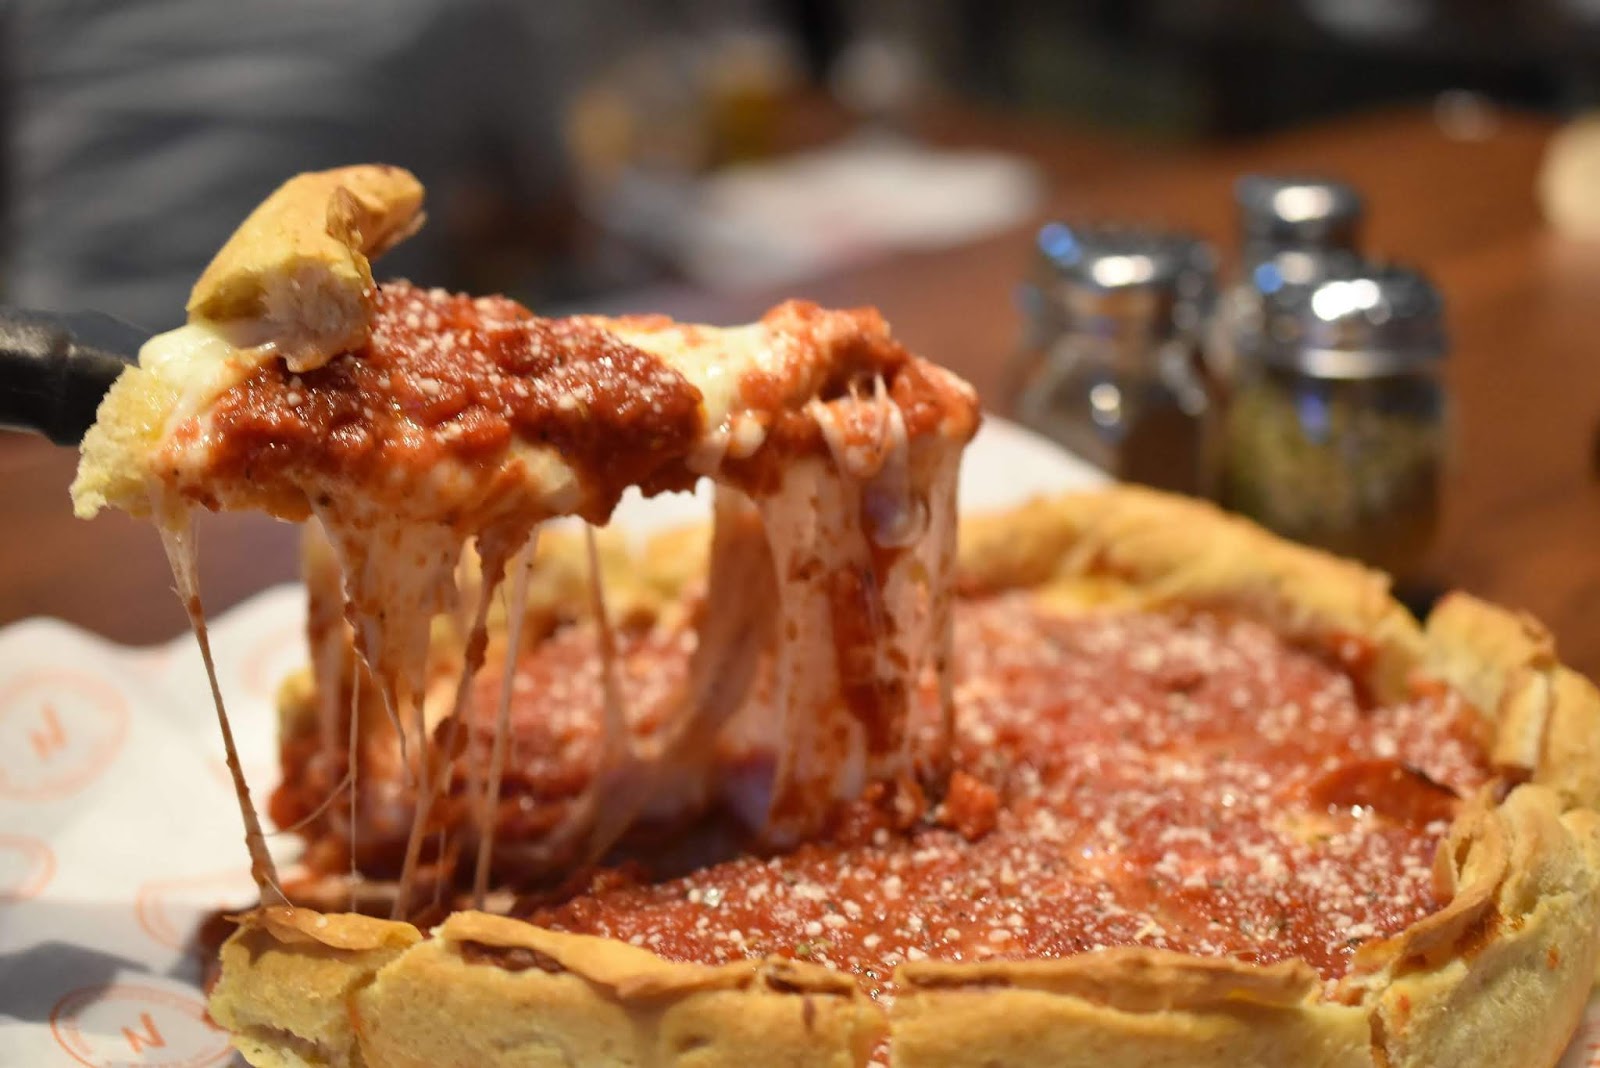 Have Authentic Chicago-Style Stuffed Pizza in Atlanta: Nancy's Pizzeria in Dunwoody  via  www.productreviewmom.com